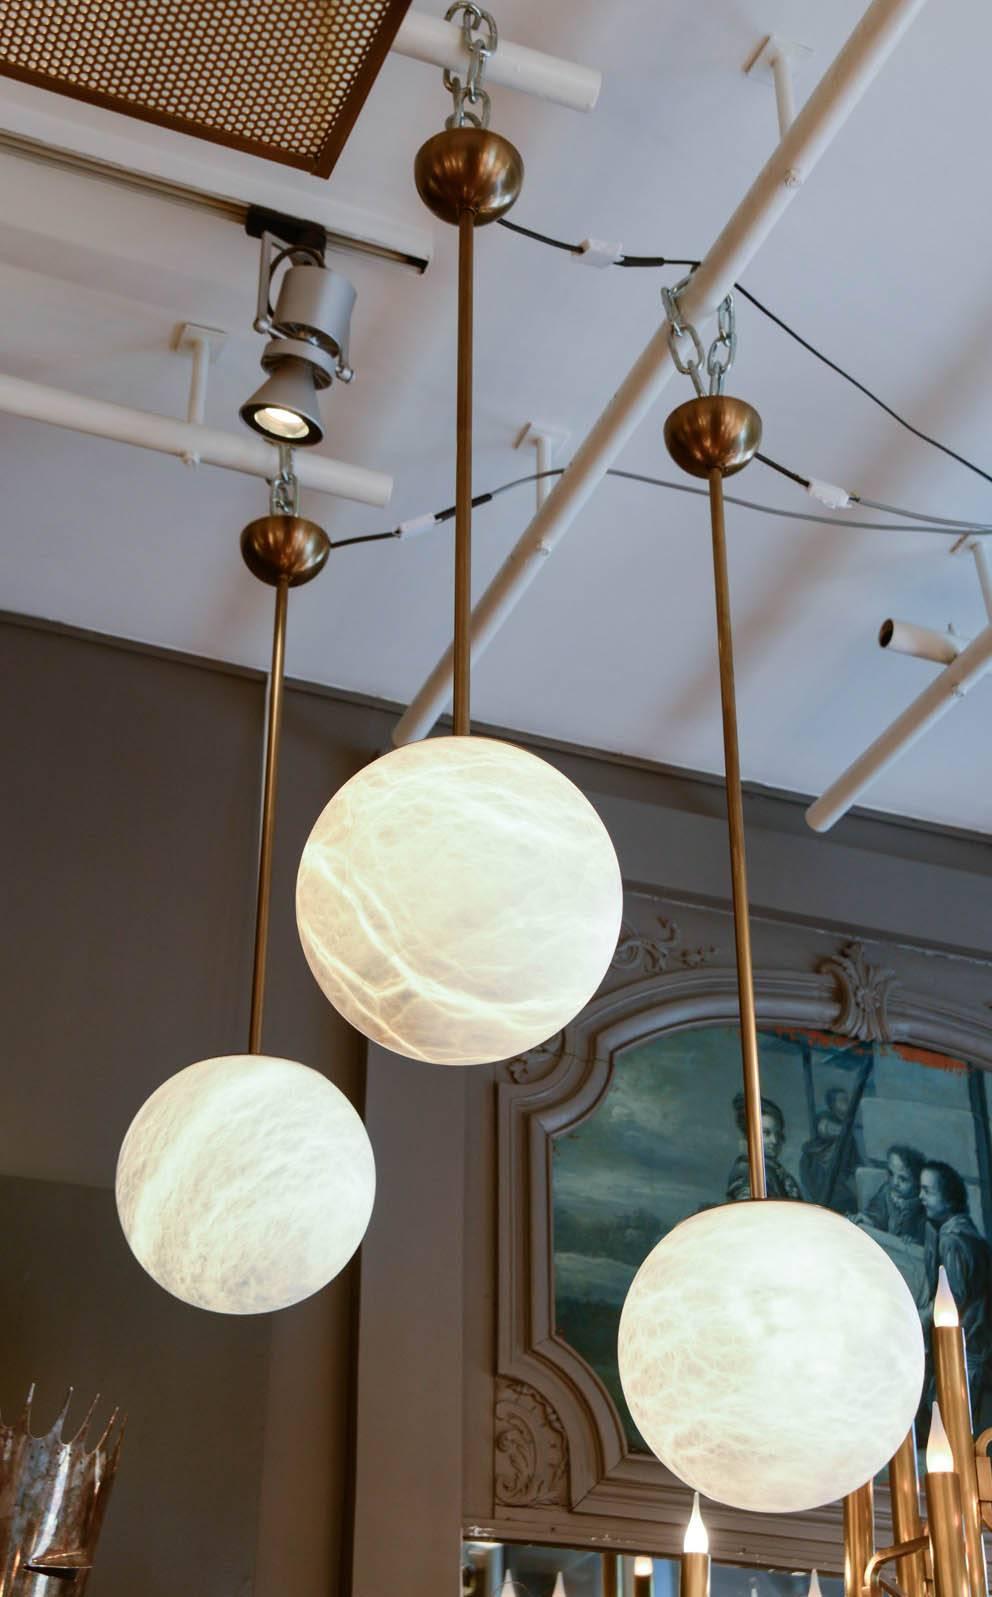 New design by Glustin Luminaires, these very elegant and simple pendant made of patinated brass stem holding an alabaster globe.

 